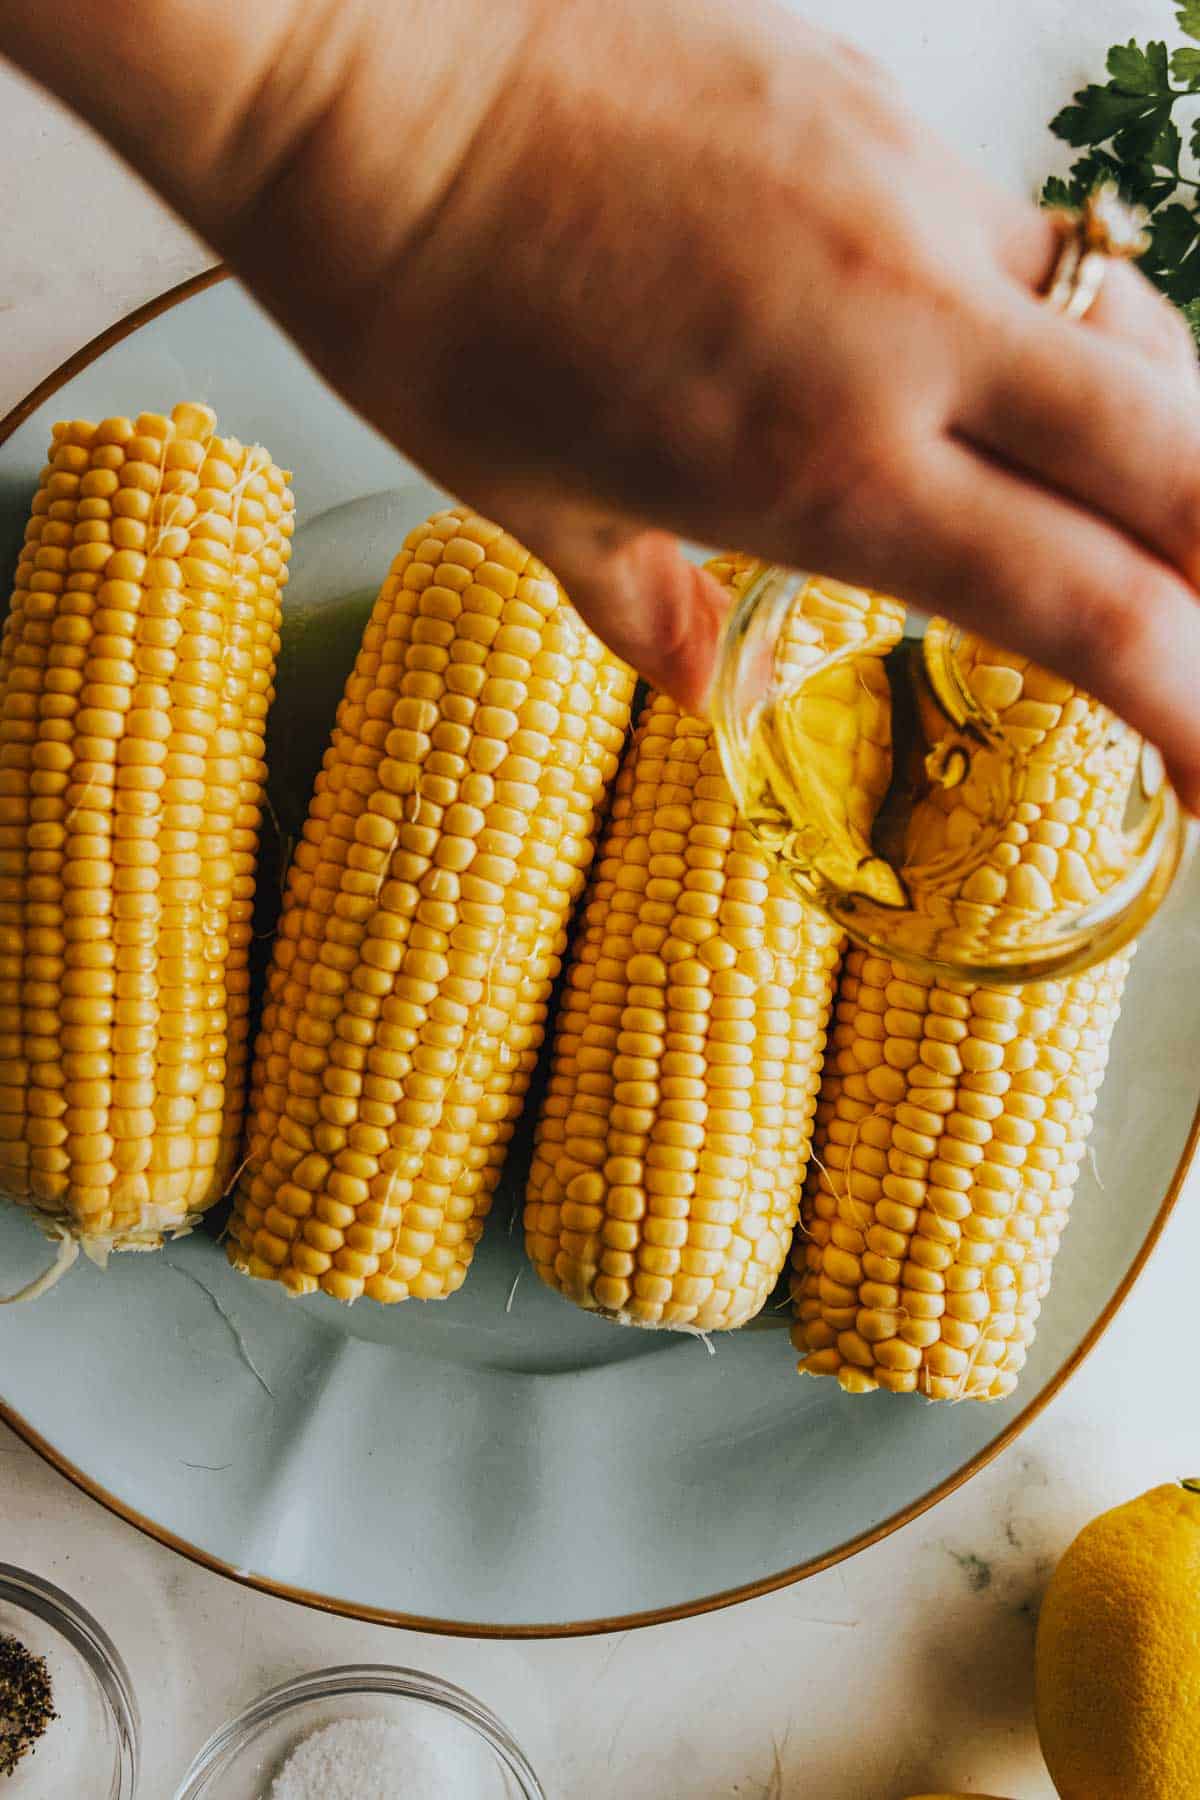 A person drizzling oil onto corn on the cob.